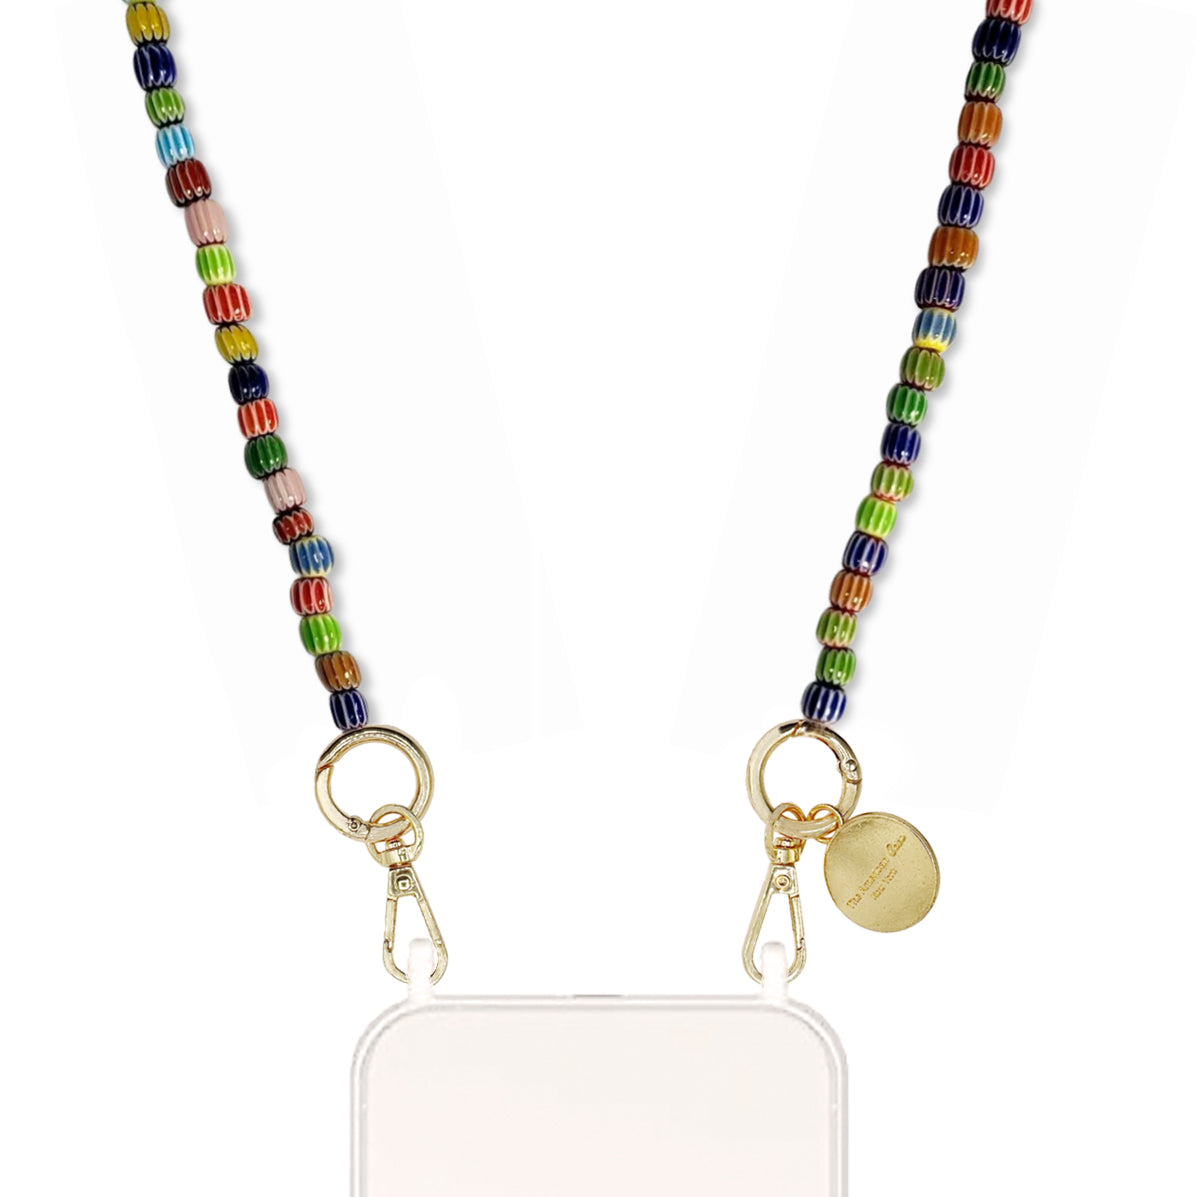 Zola - African Inspired Bead Crossbody Chain with Golden Carabiners